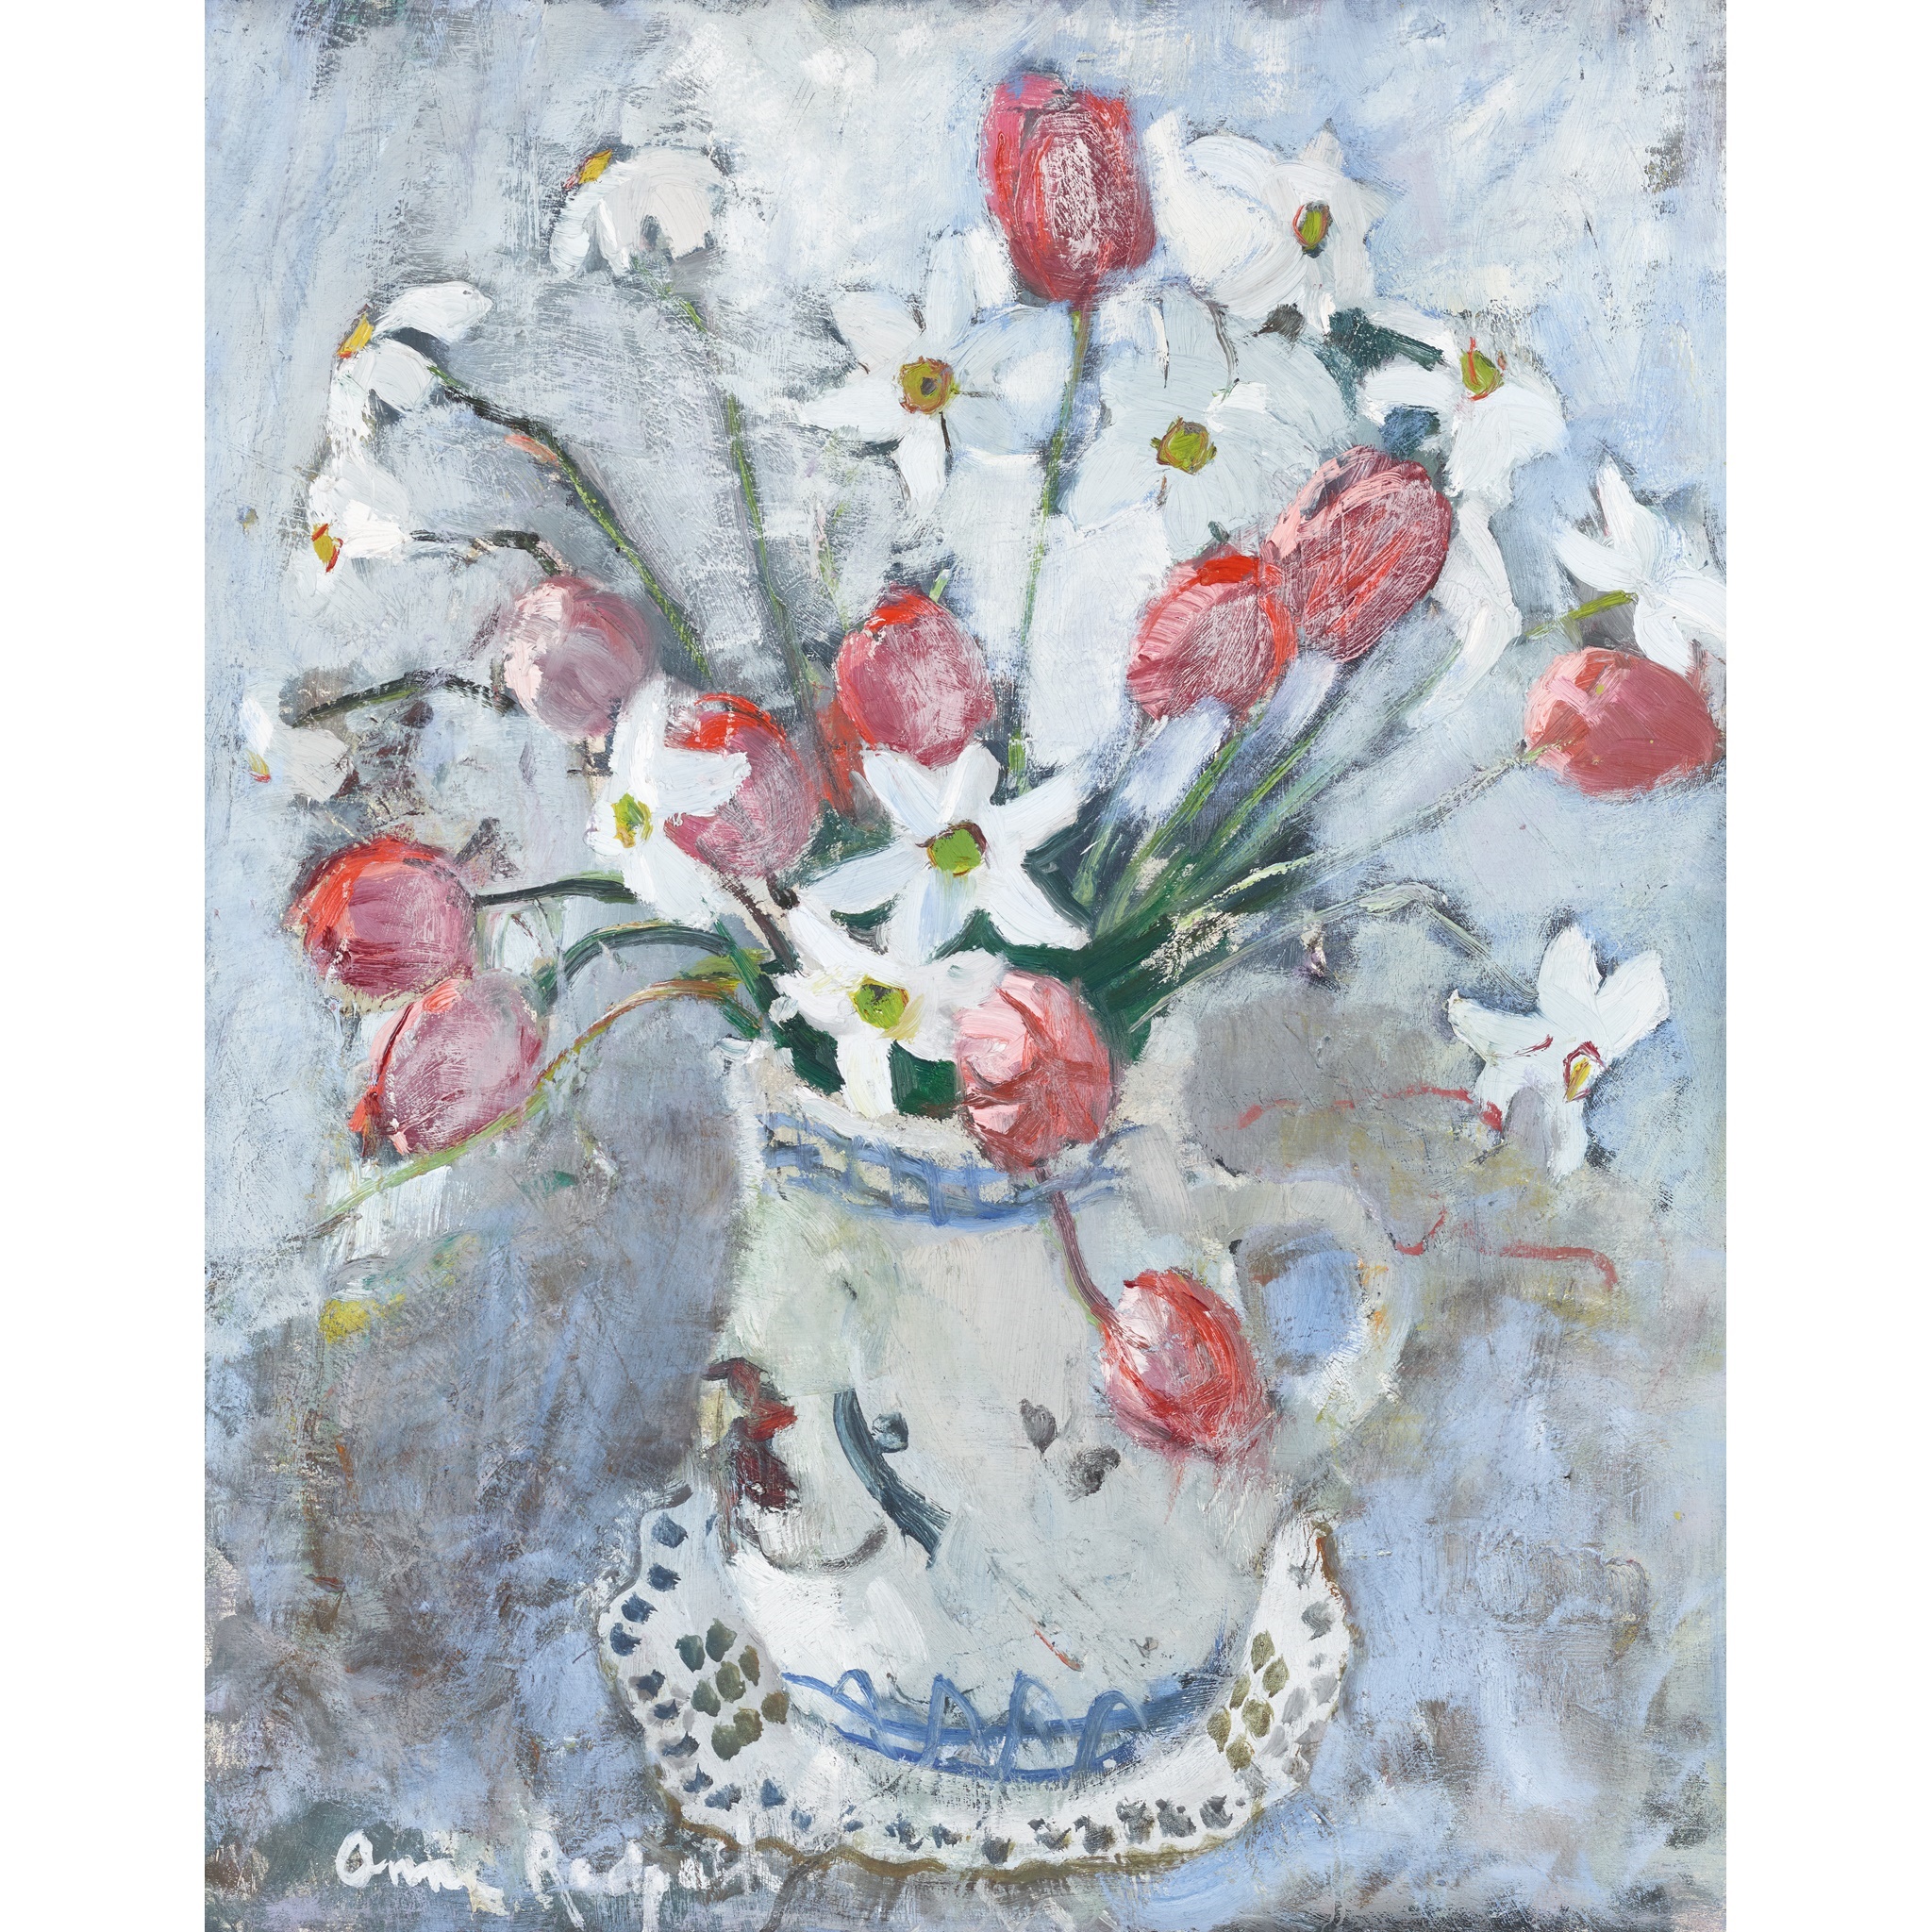 ANNE REDPATH O.B.E., R.S.A., A.R.A., L.L.D., A.R.W.S., R.O.I., R.B.A. (SCOTTISH 1895-1965) STILL LIFE - TULIPS AND LILIES